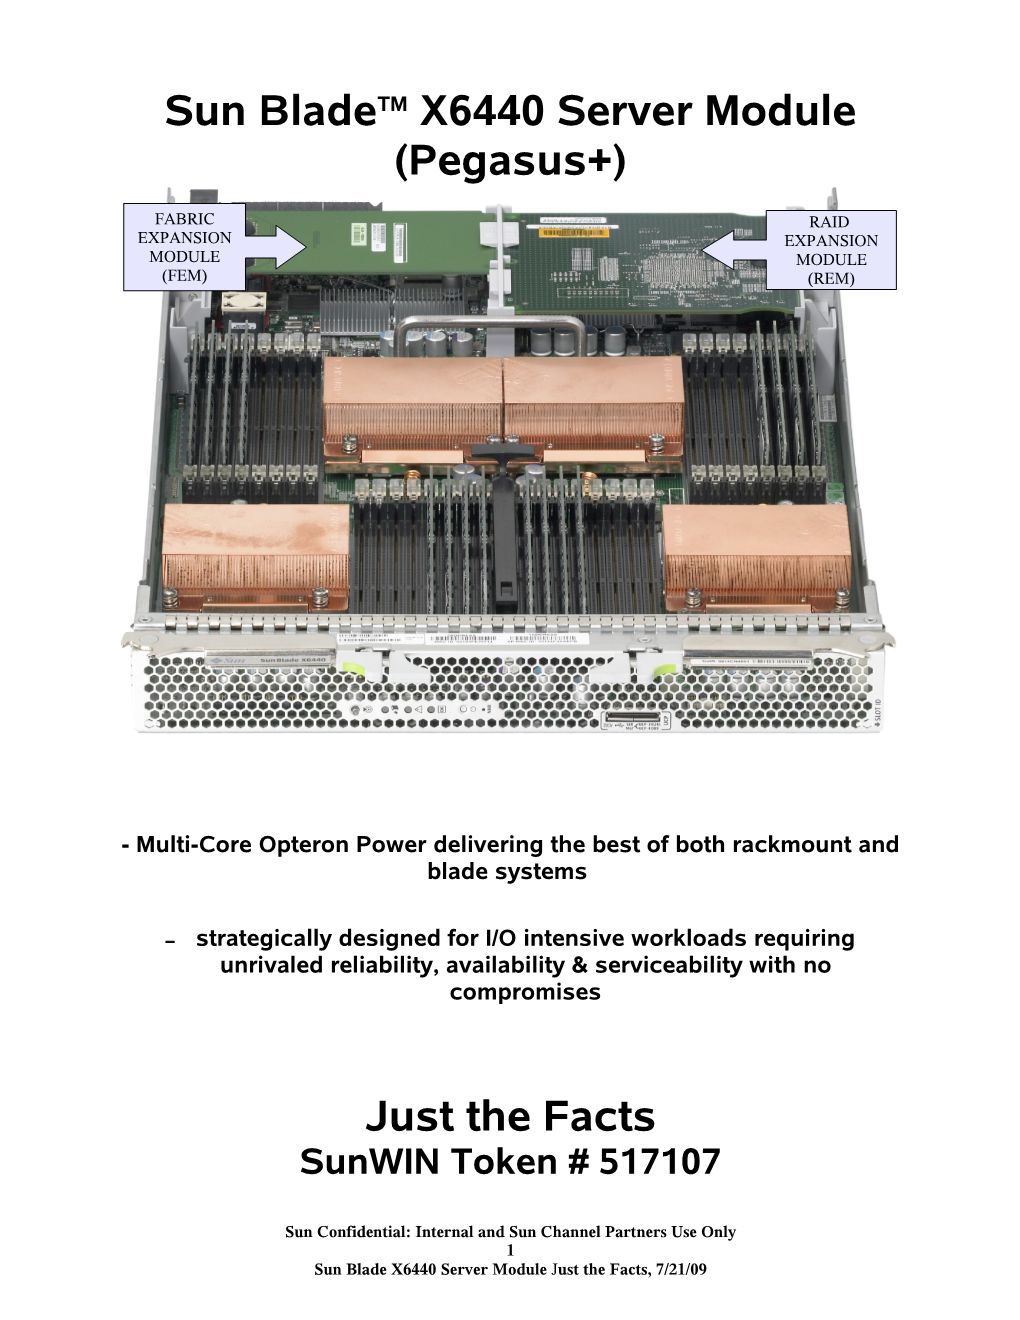 Sun Blade X6440 Server Module, Just the Facts